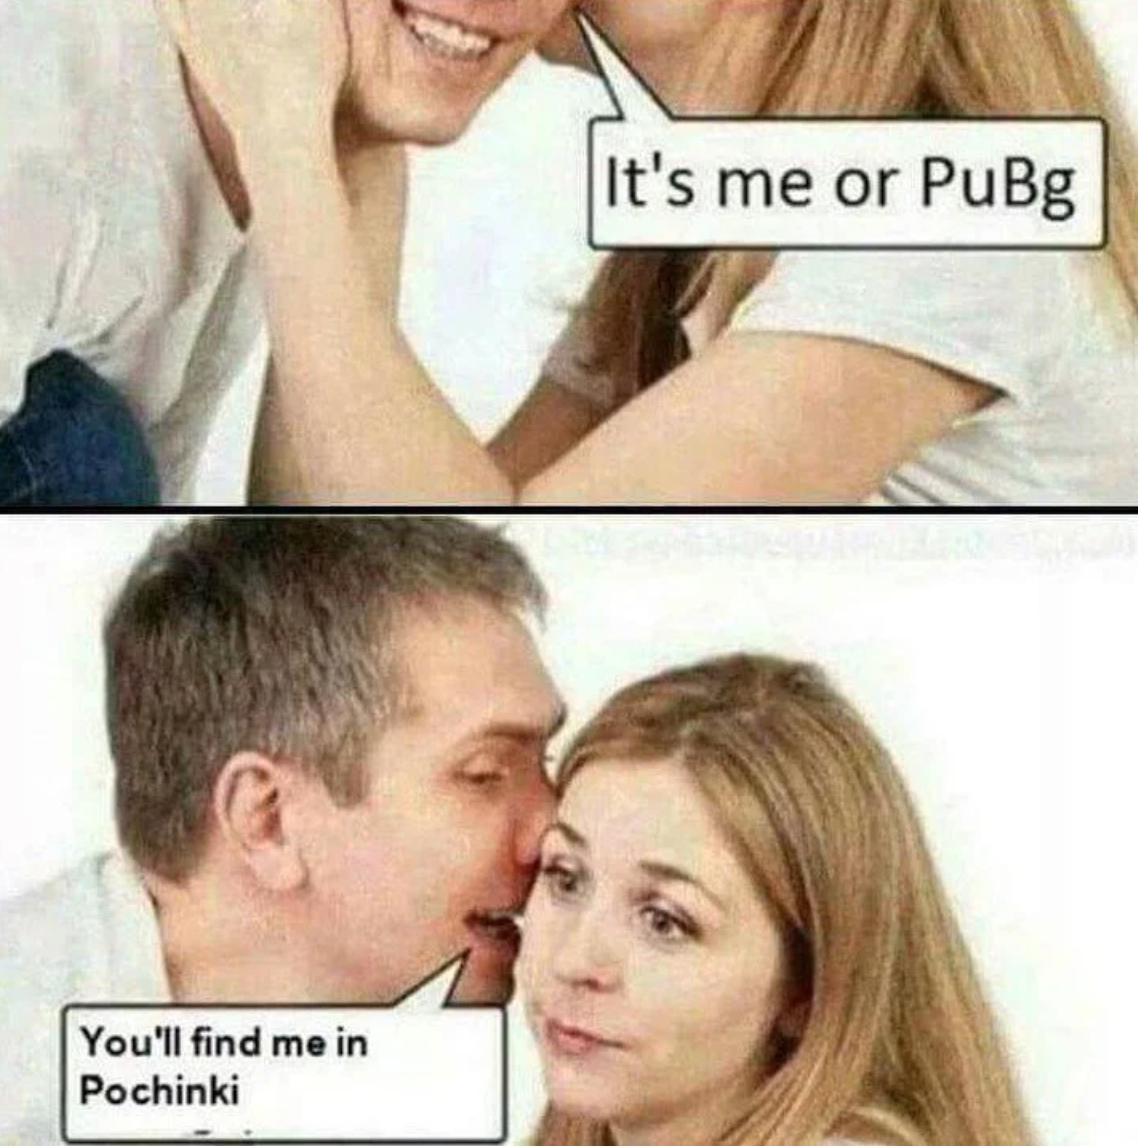 funny gaming memes - pubg or me meme - It's me or PuBg You'll find me in Pochinki